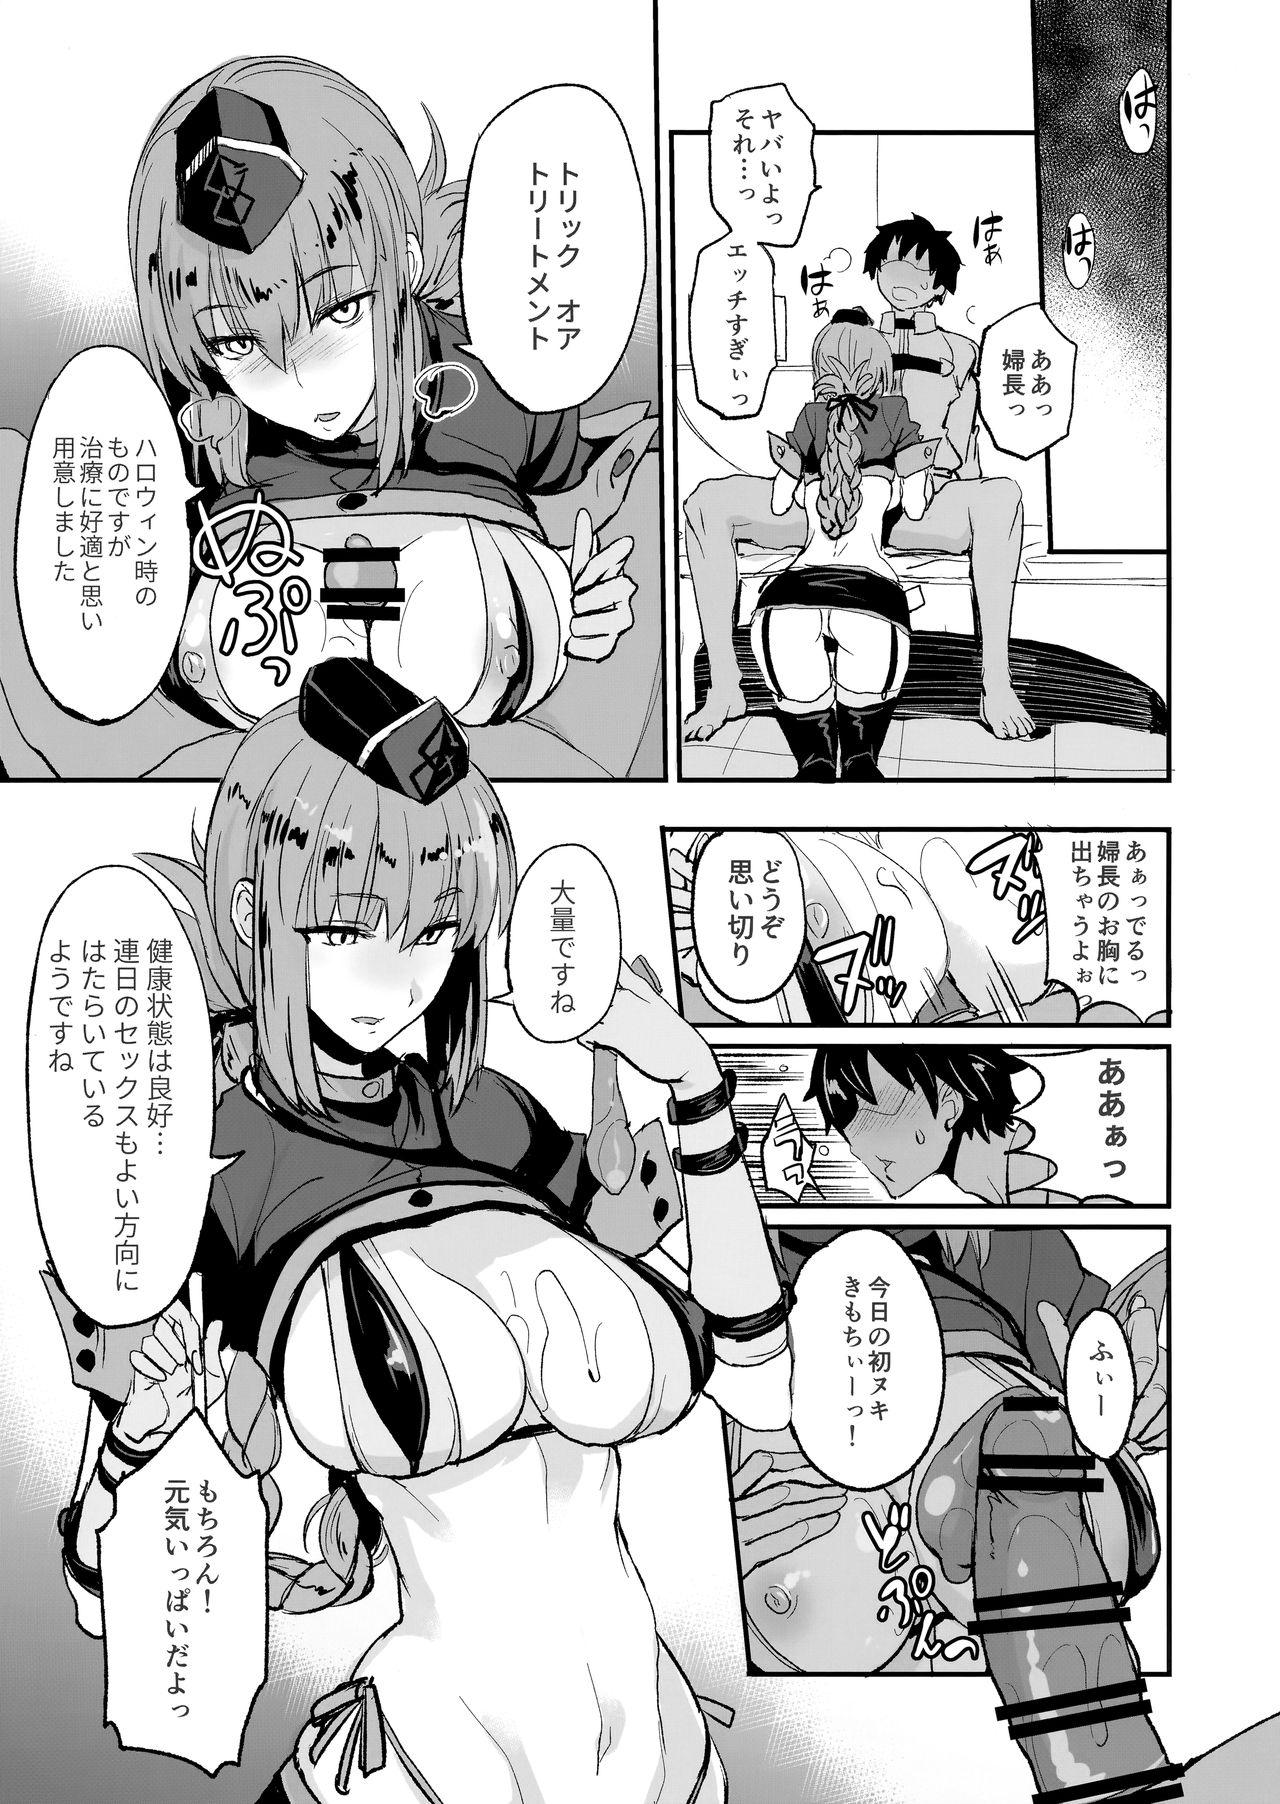 Hot Girls Getting Fucked FGO no Erohon 2 - Fate grand order Bang - Page 4